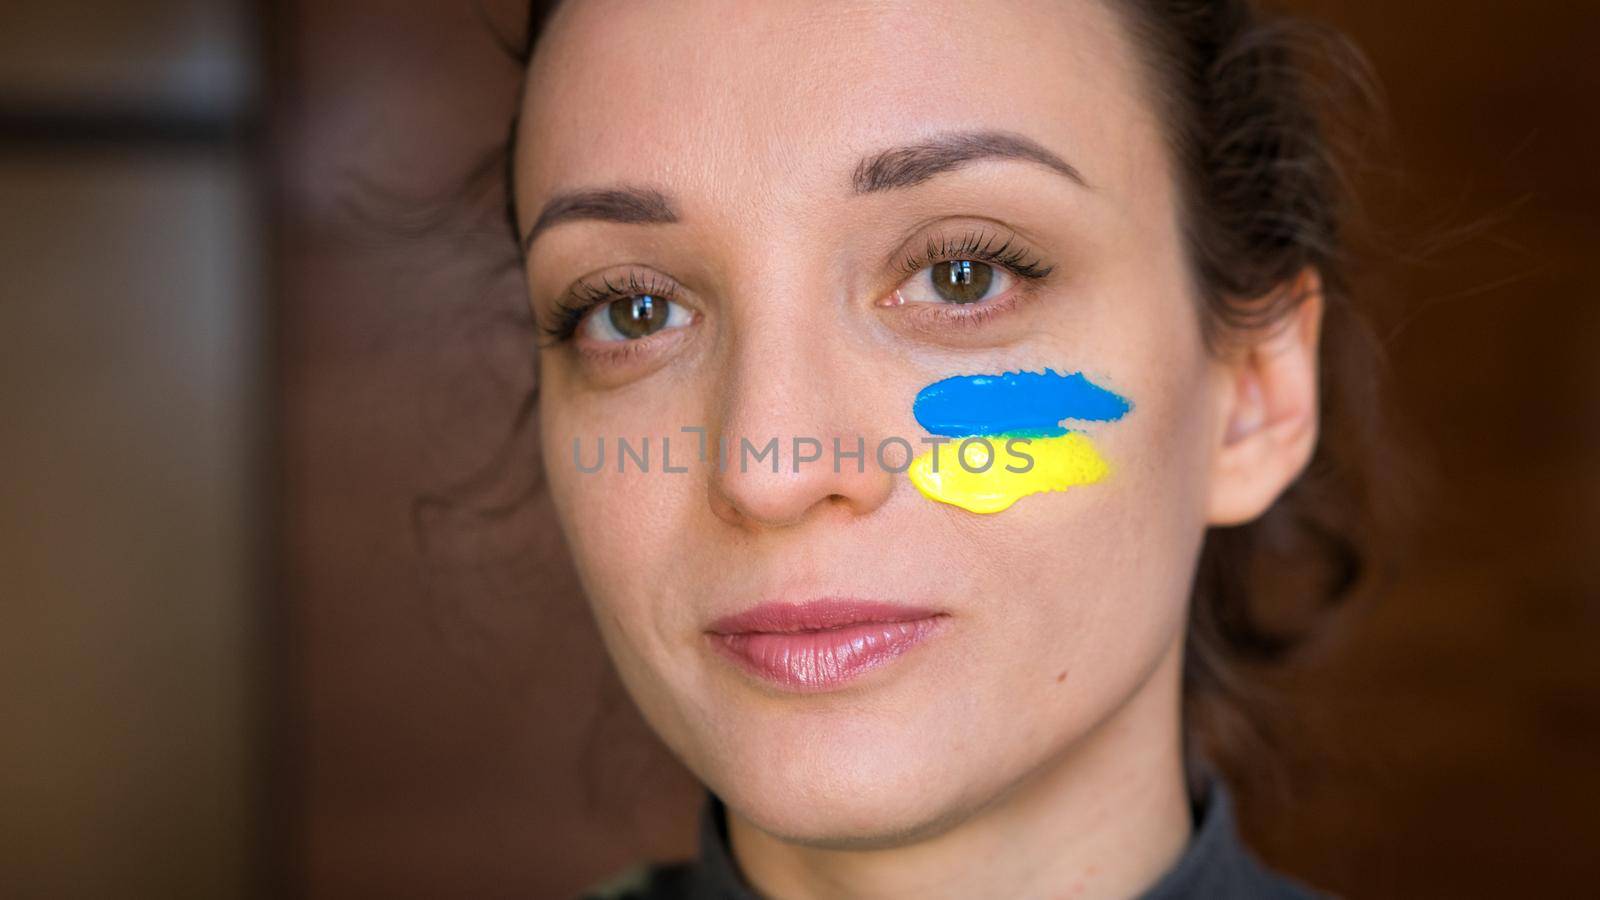 Indoor portrait of young girl with blue and yellow ukrainian flag on her cheek wearing military uniform, mandatory conscription in Ukraine, equality concepts.